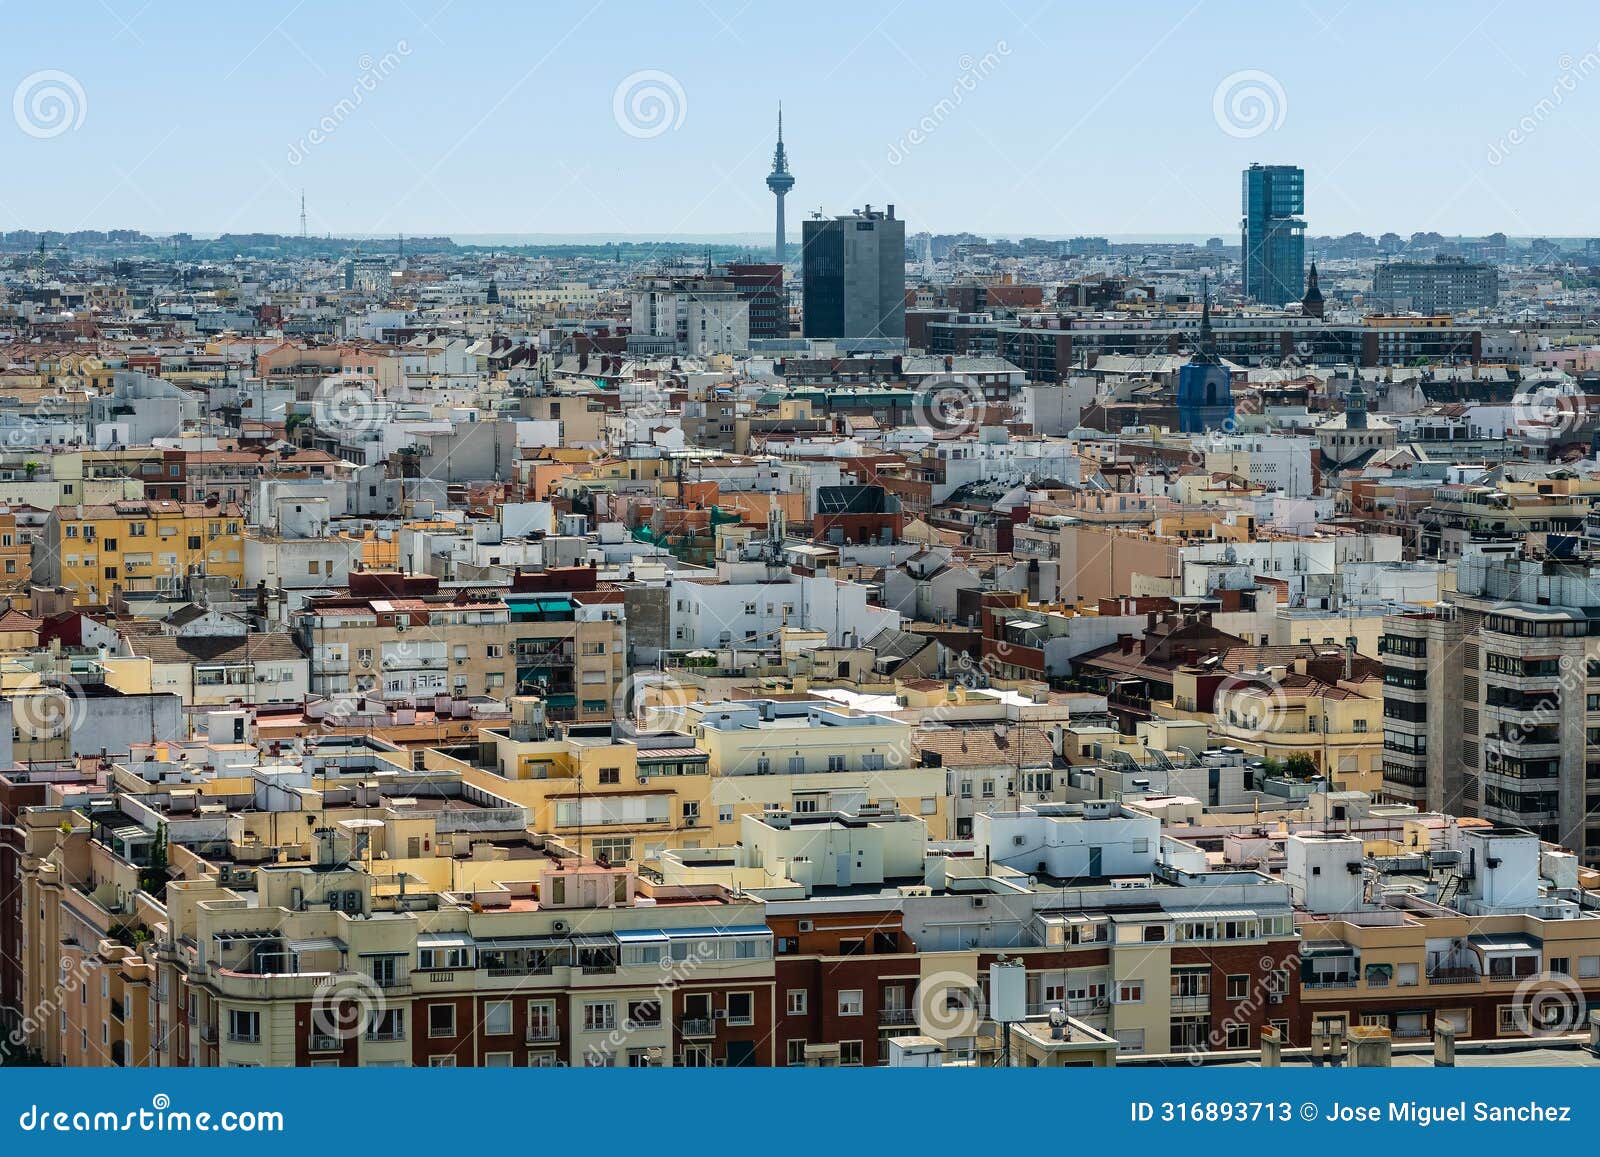 cityscape of the city of madrid in a drone view with residential and office buildings, spain.